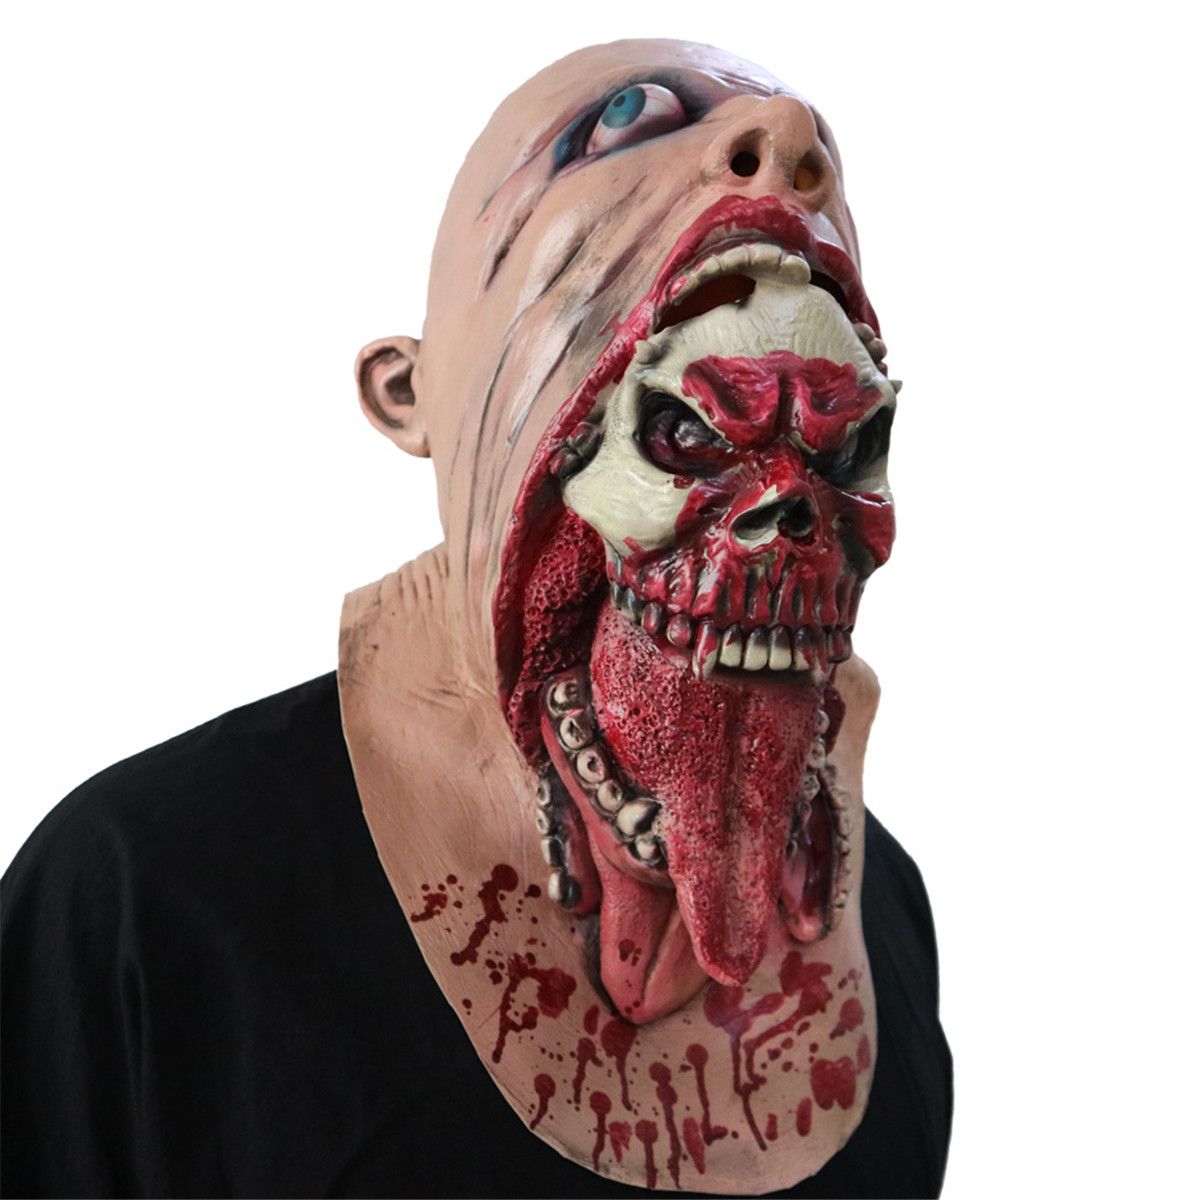 Halloween-Adult-Sloth-Deluxe-Latex-Mask-Scary-Costume-Fancy-Mask-Zombie-Mask-Decoration-Props-1730882